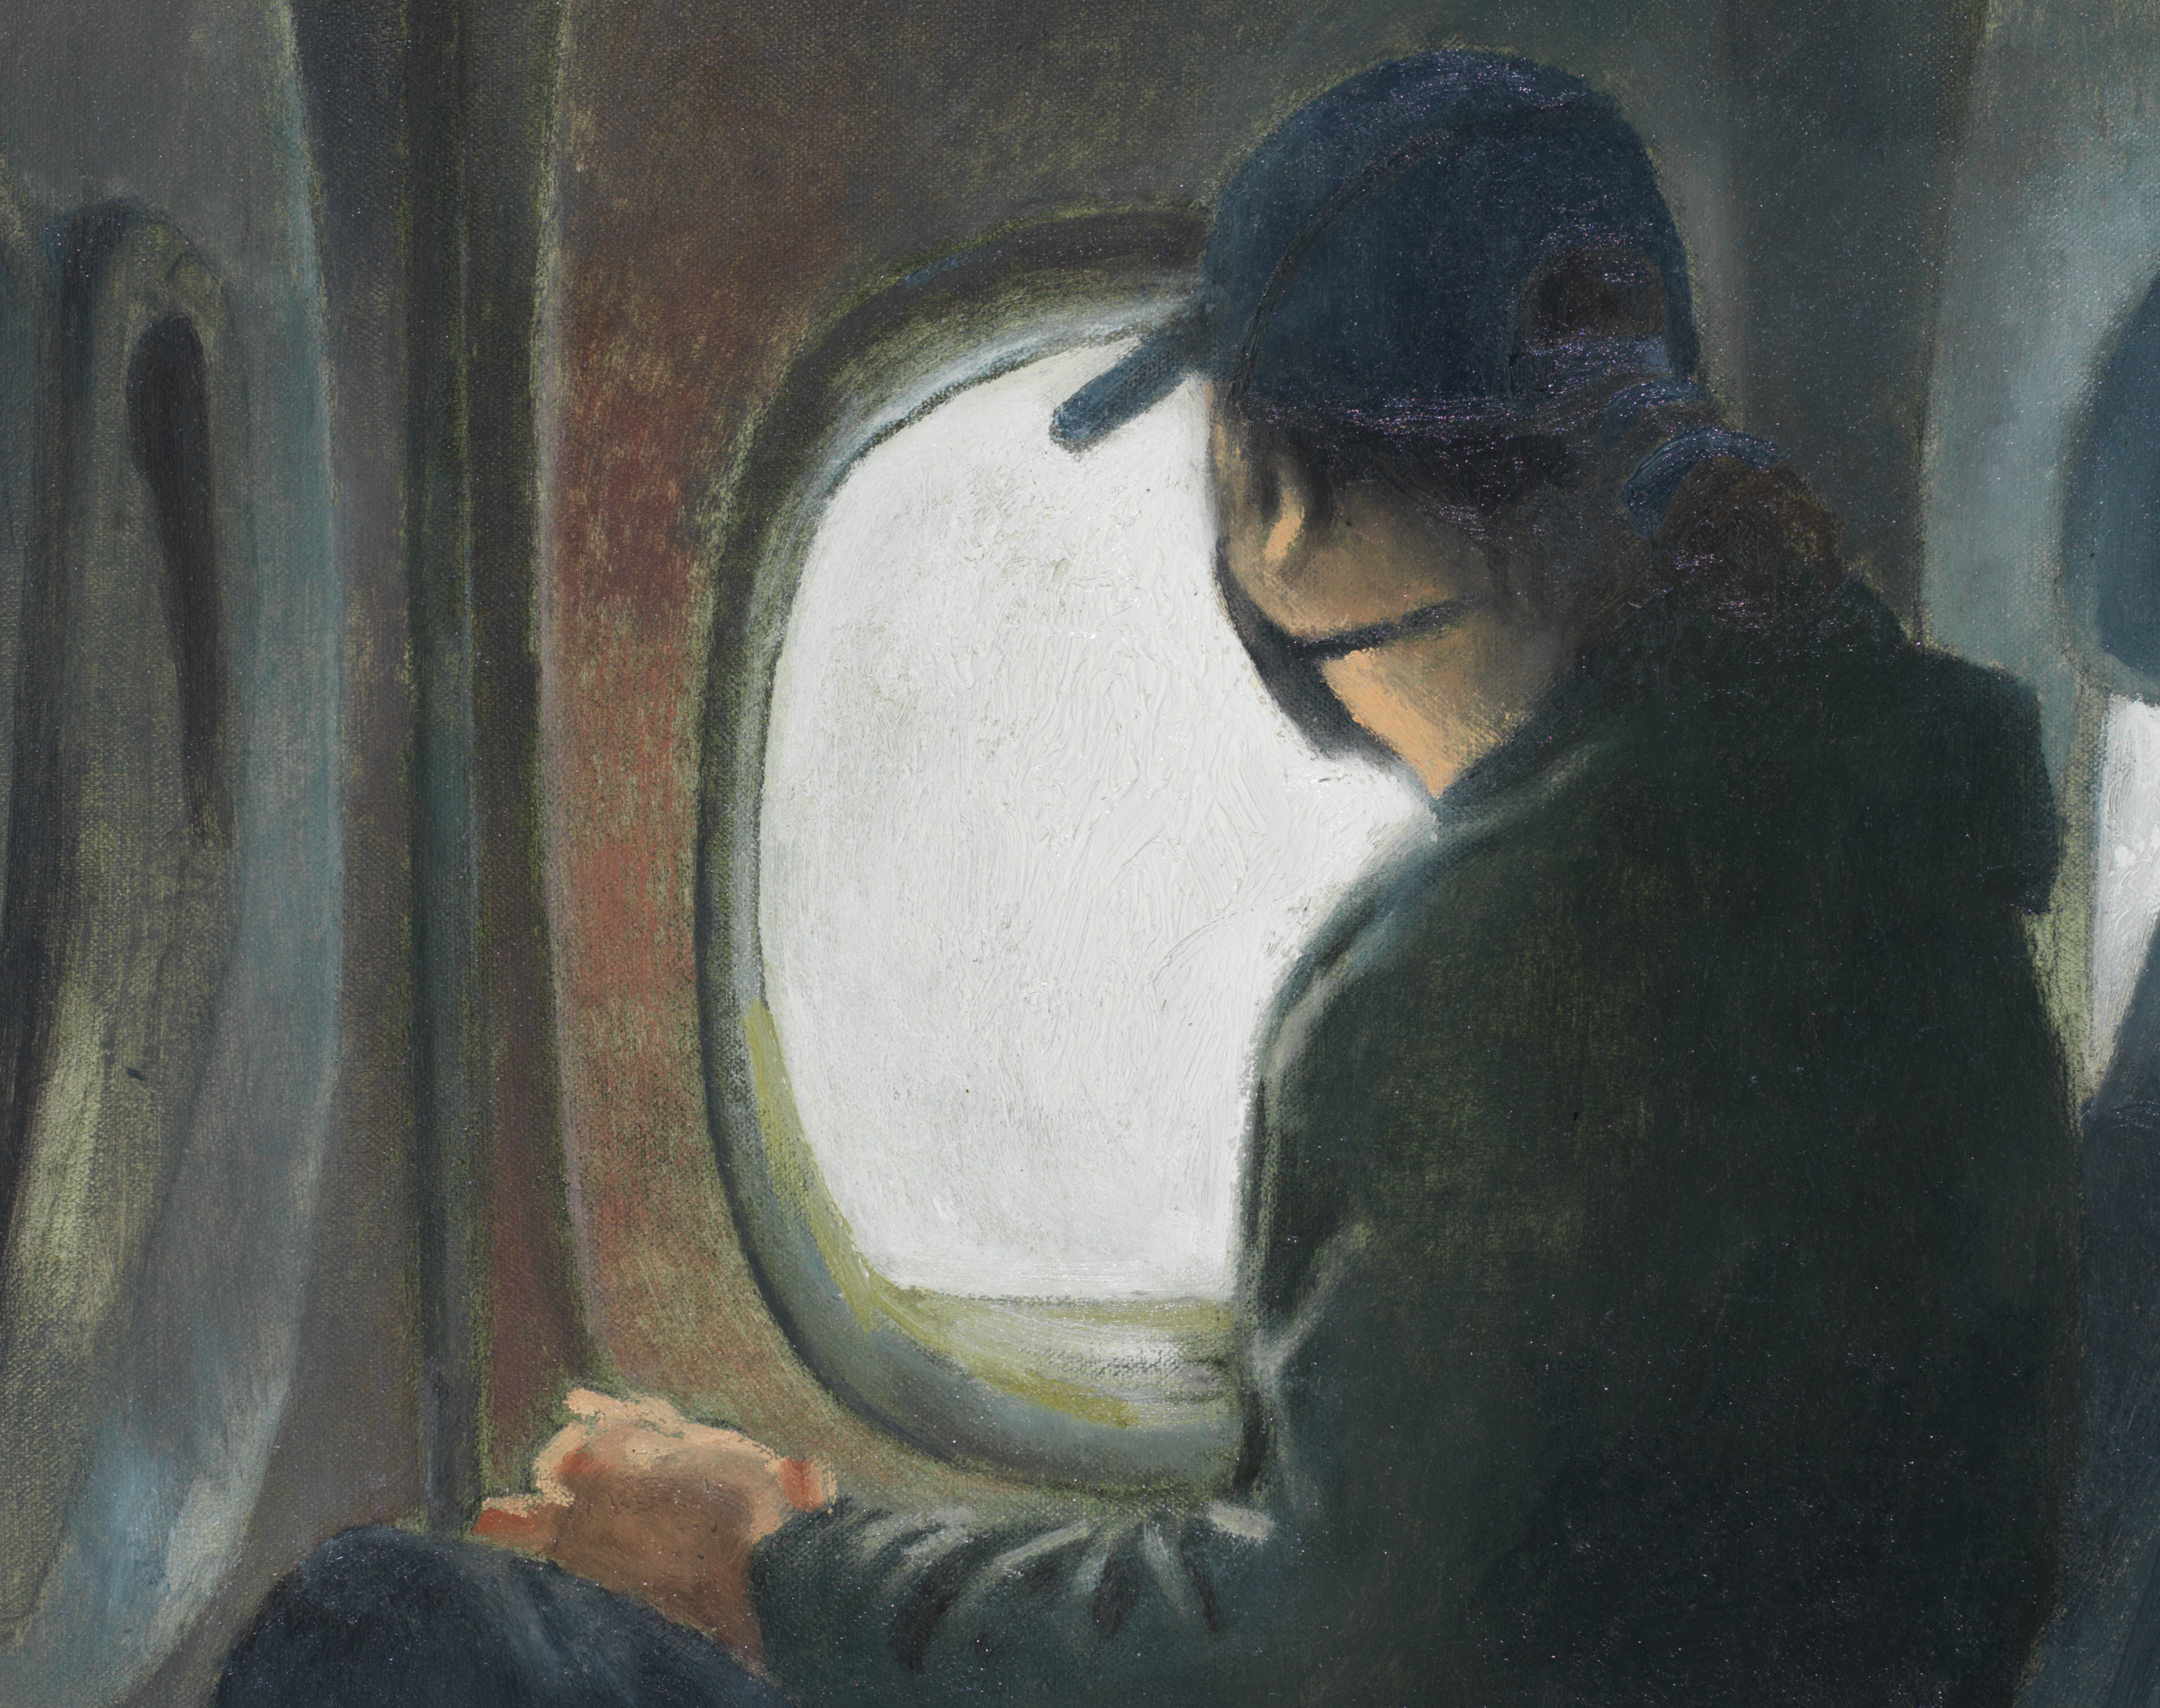 Detail of Woman at the Window by Taylor Larsen, Oil on canvas, 2021